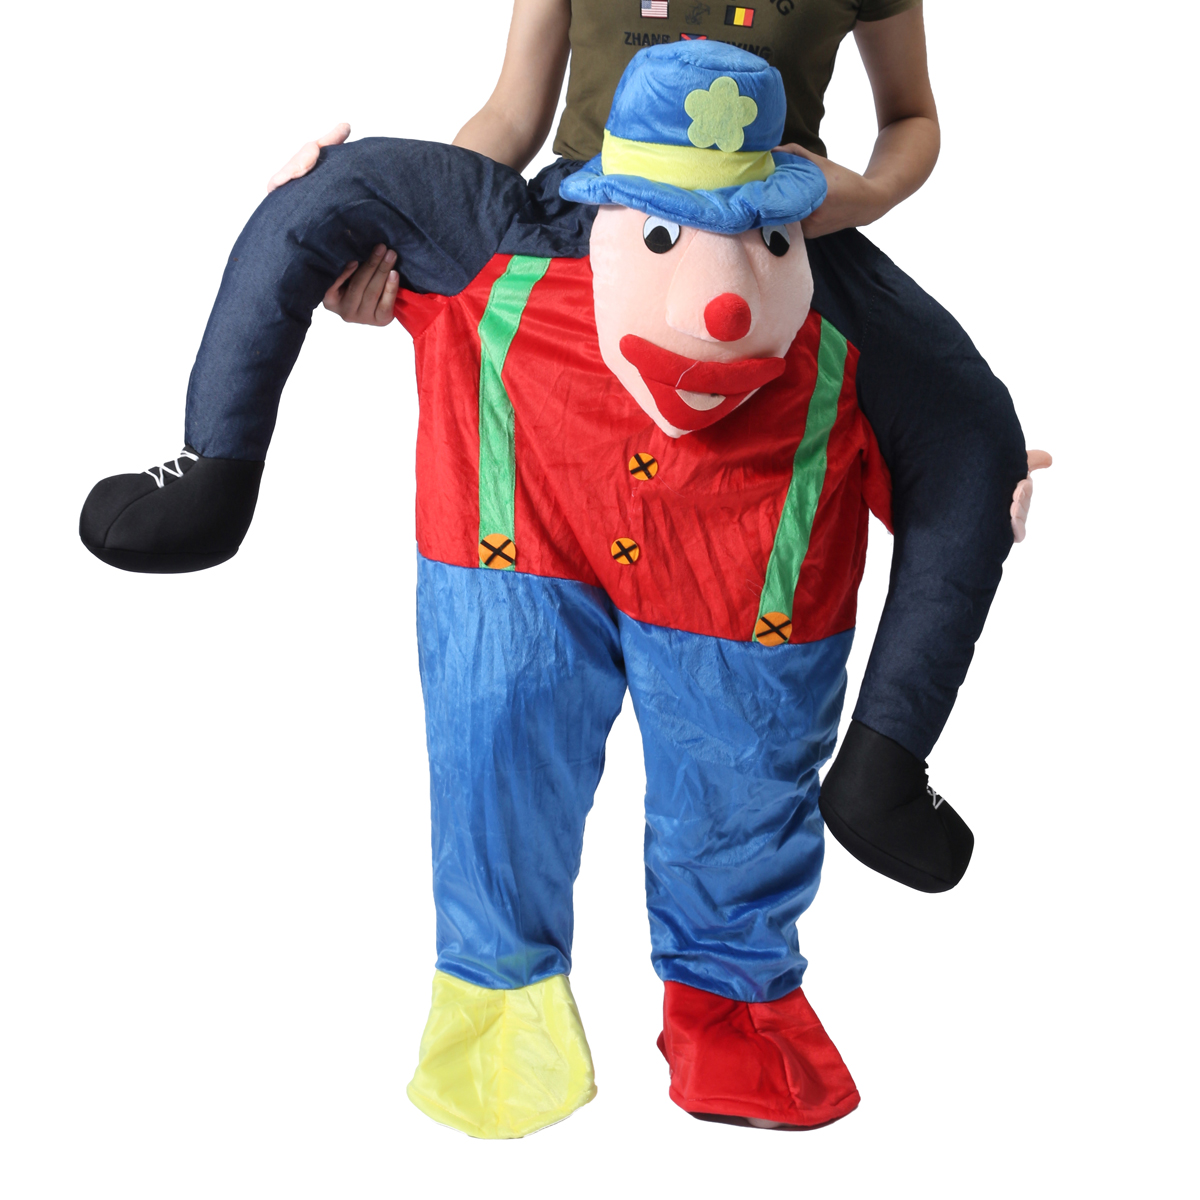 Hallowen-Christmas-Shoulder-Carry-Me-Piggy-Back-Ride-On-Fancy-Dress-Adult-Party-Costume-Outfit-1204091-6